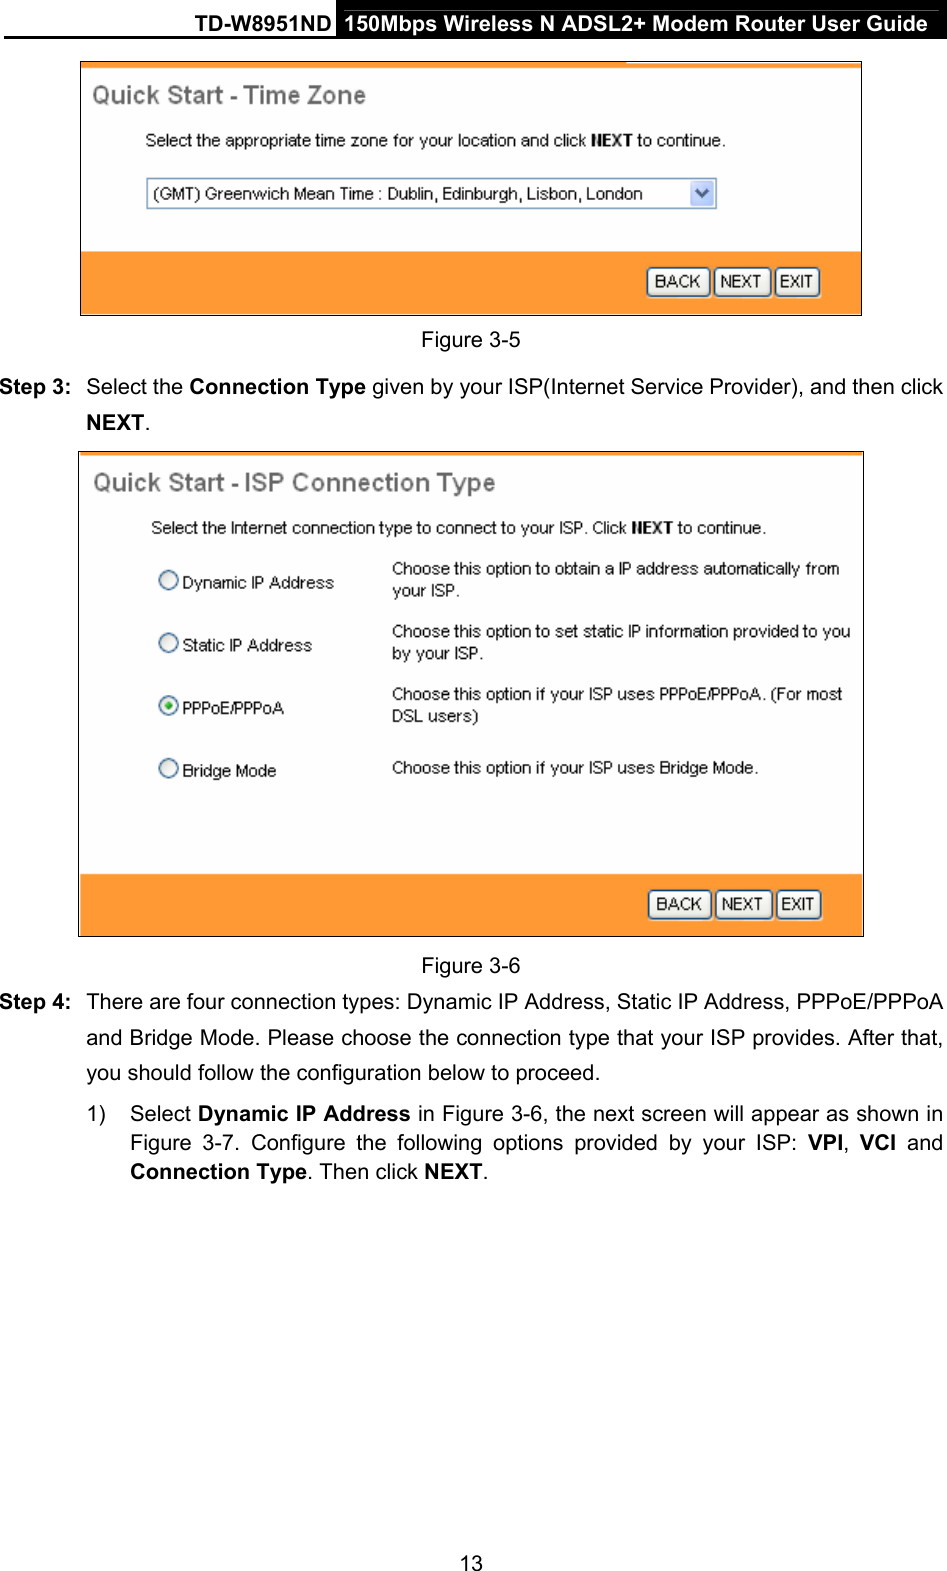 TD-W8951ND  150Mbps Wireless N ADSL2+ Modem Router User Guide  Figure 3-5 Step 3:  Select the Connection Type given by your ISP(Internet Service Provider), and then click NEXT.  Figure 3-6 Step 4:  There are four connection types: Dynamic IP Address, Static IP Address, PPPoE/PPPoA and Bridge Mode. Please choose the connection type that your ISP provides. After that, you should follow the configuration below to proceed. 1) Select Dynamic IP Address in Figure 3-6, the next screen will appear as shown in Figure 3-7.  Configure the following options provided by your ISP: VPI,  VCI and Connection Type. Then click NEXT.  13 